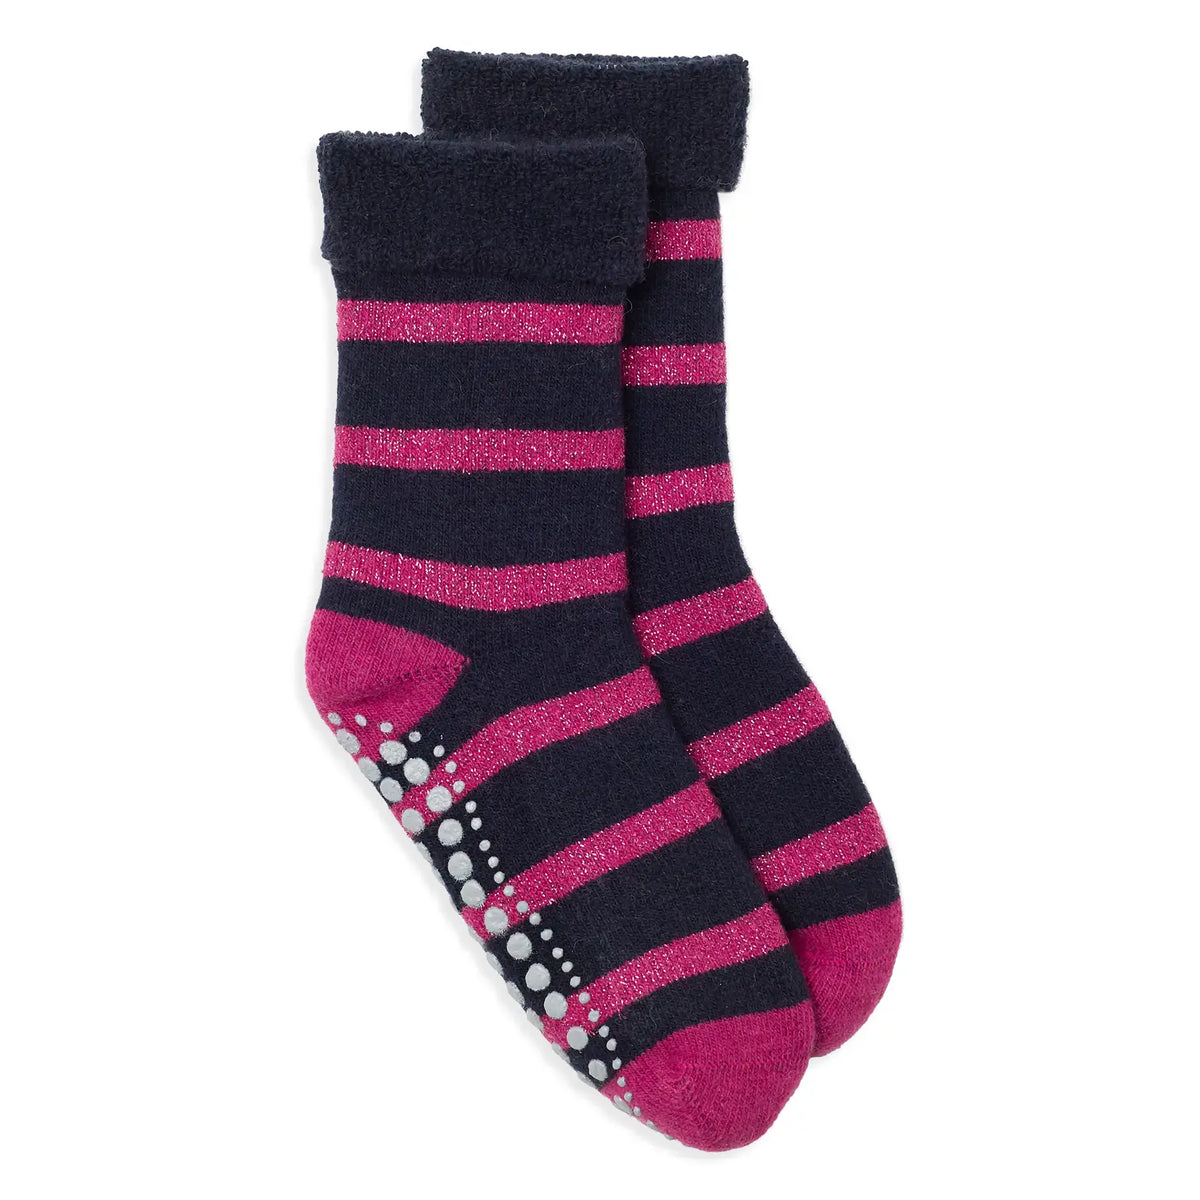 Navy and hot pink glitter stripe slipper socks with rubber grip sole